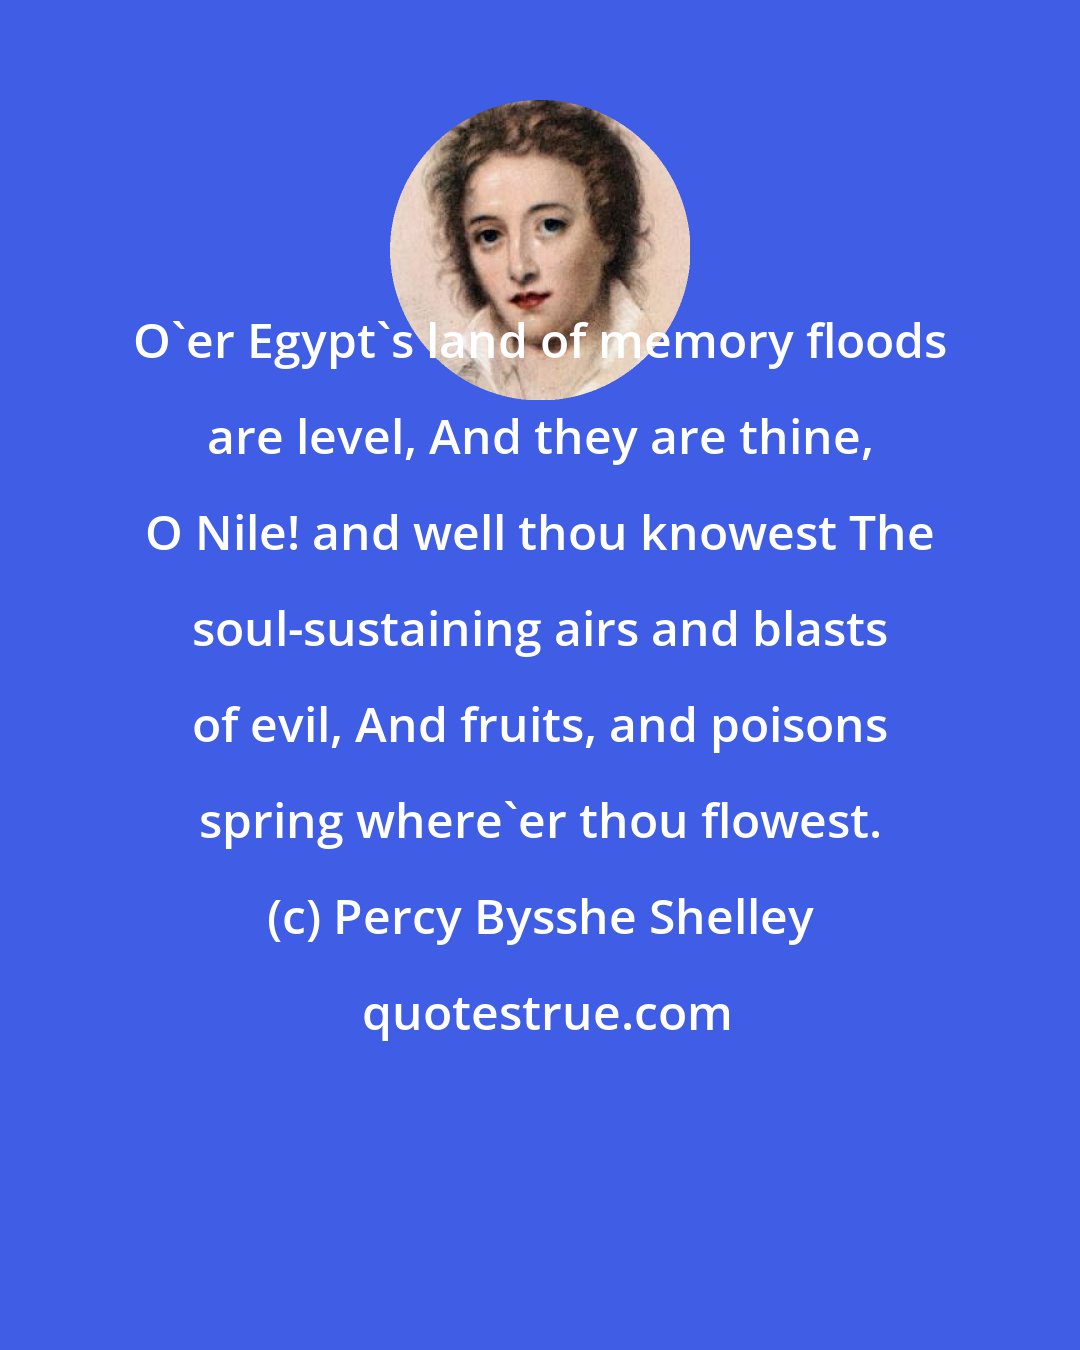 Percy Bysshe Shelley: O'er Egypt's land of memory floods are level, And they are thine, O Nile! and well thou knowest The soul-sustaining airs and blasts of evil, And fruits, and poisons spring where'er thou flowest.